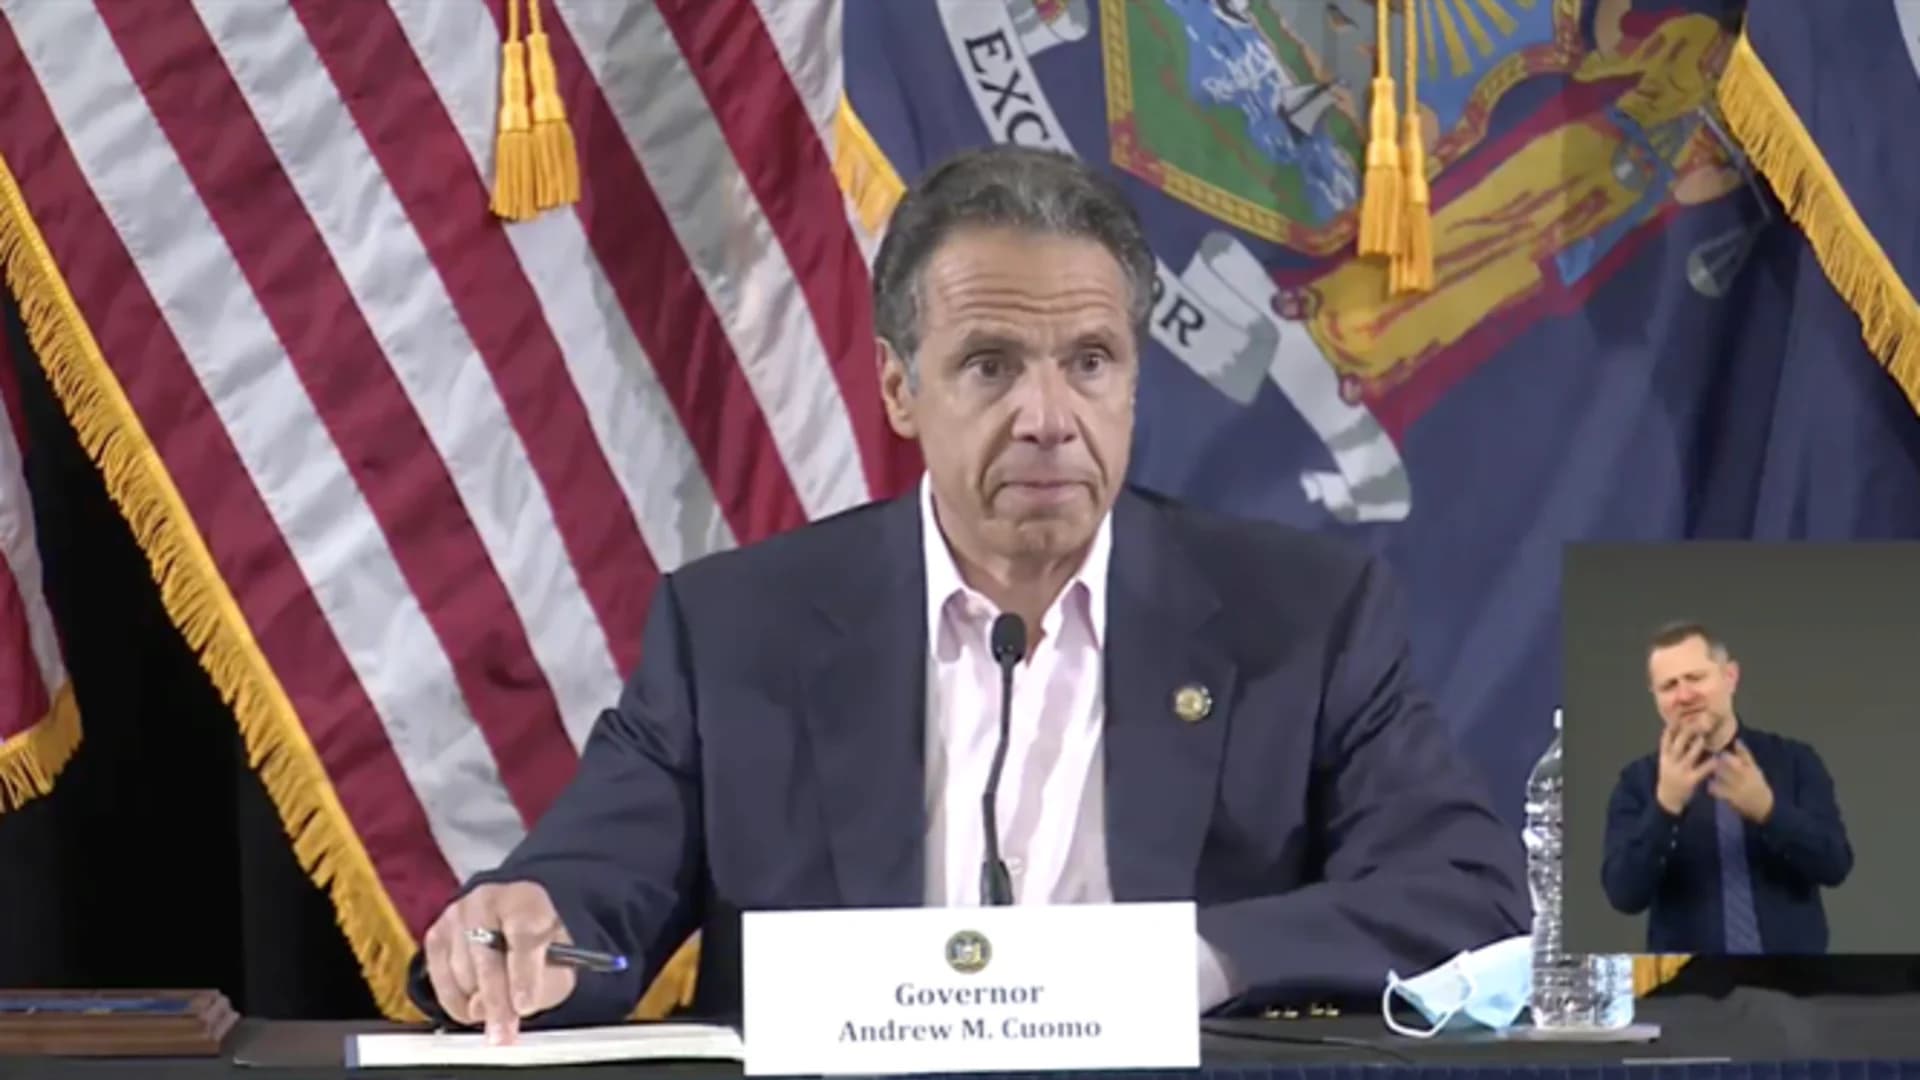 Gov. Cuomo: 'Ugly situation' as unrest hits NYC